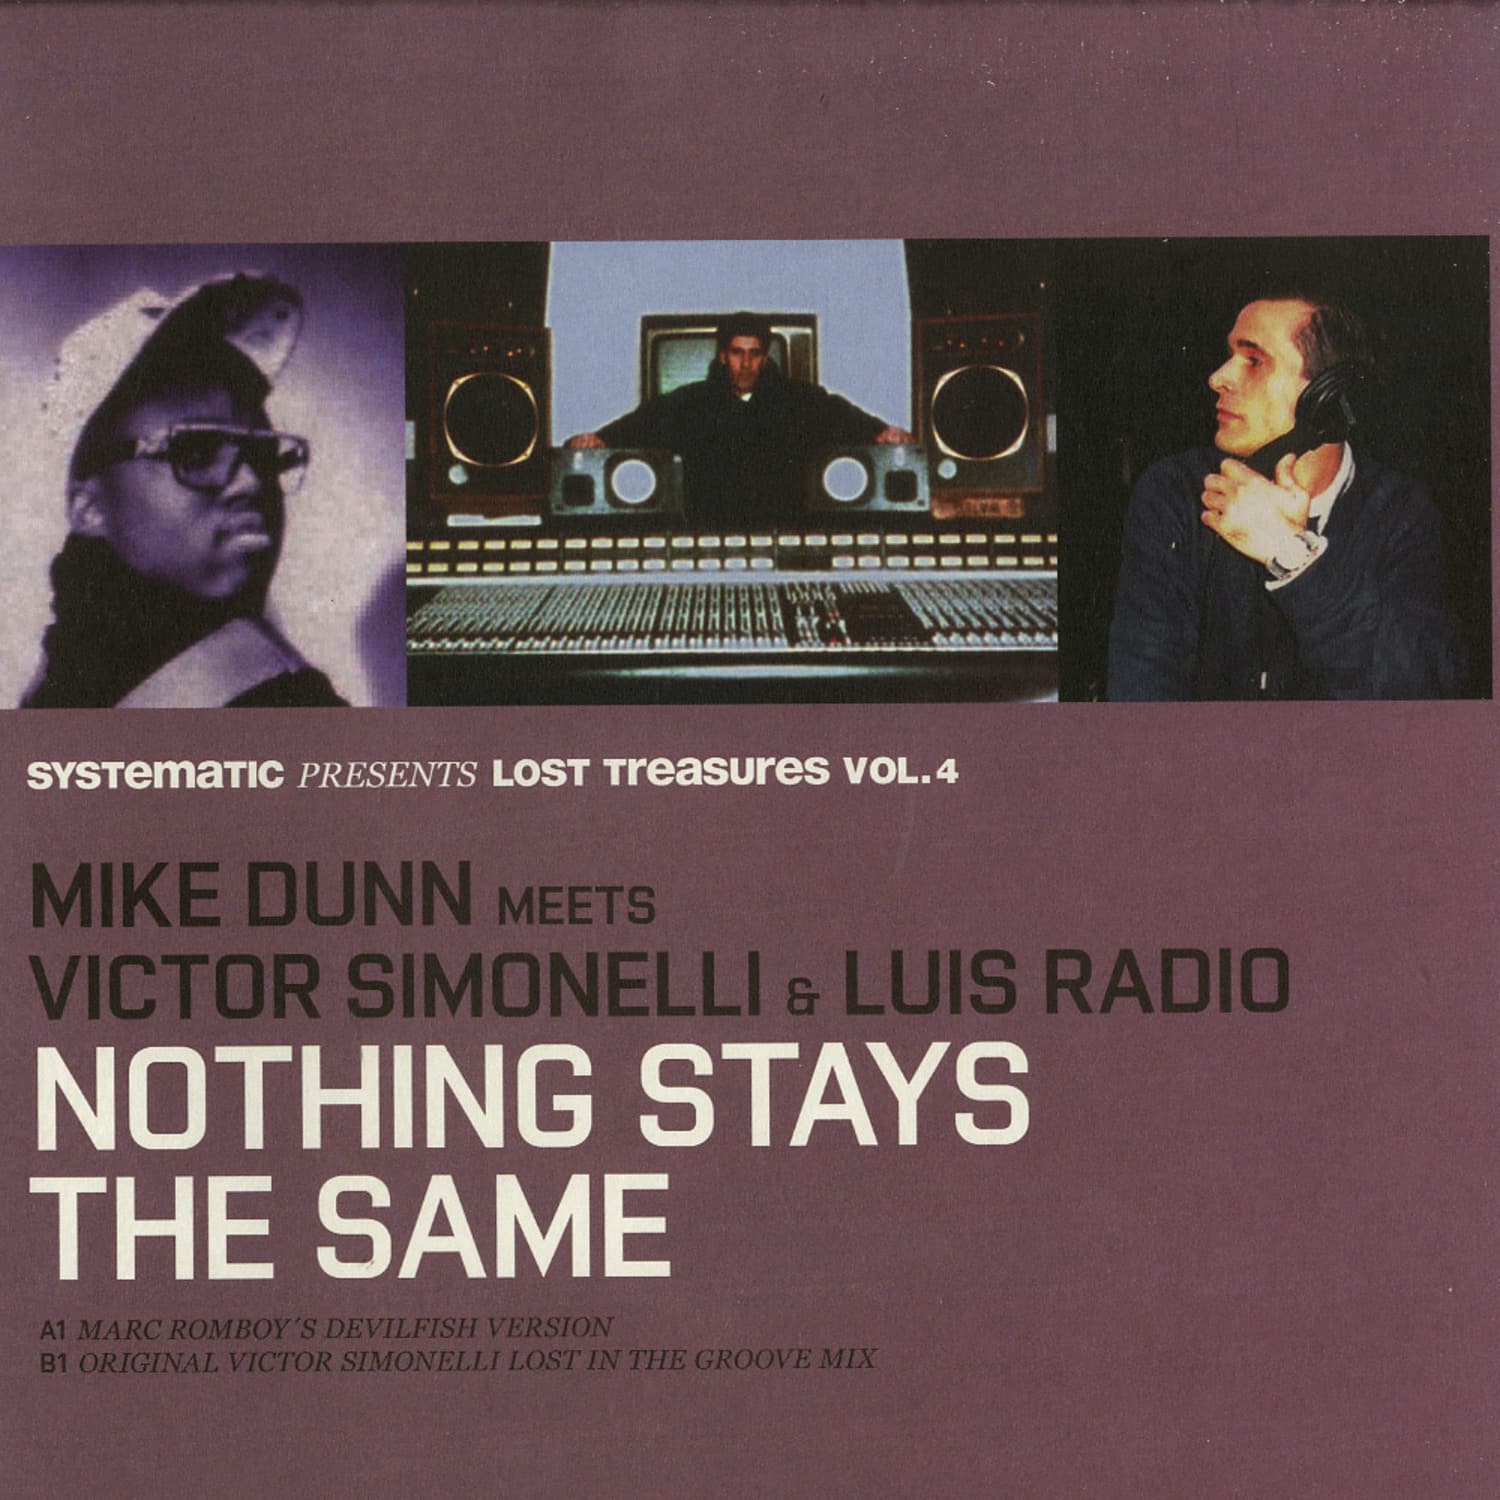 Mike Dunn meets Victor Simonelli & Luis Radio - NOTHING STAYS THE SAME